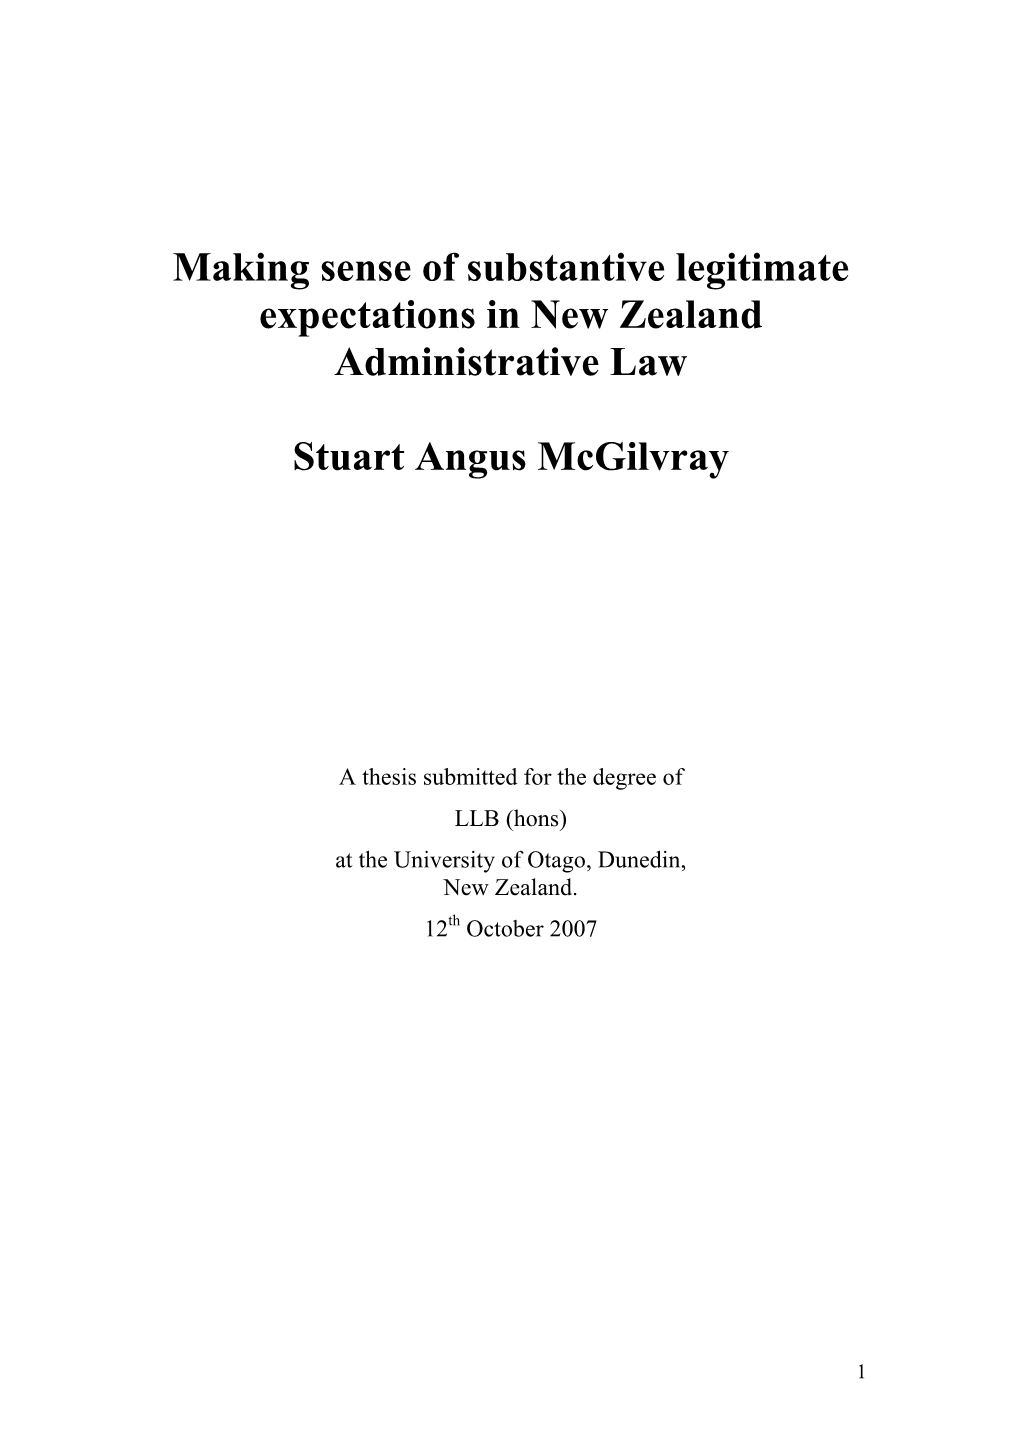 Making Sense of Substantive Legitimate Expectations in New Zealand Administrative Law